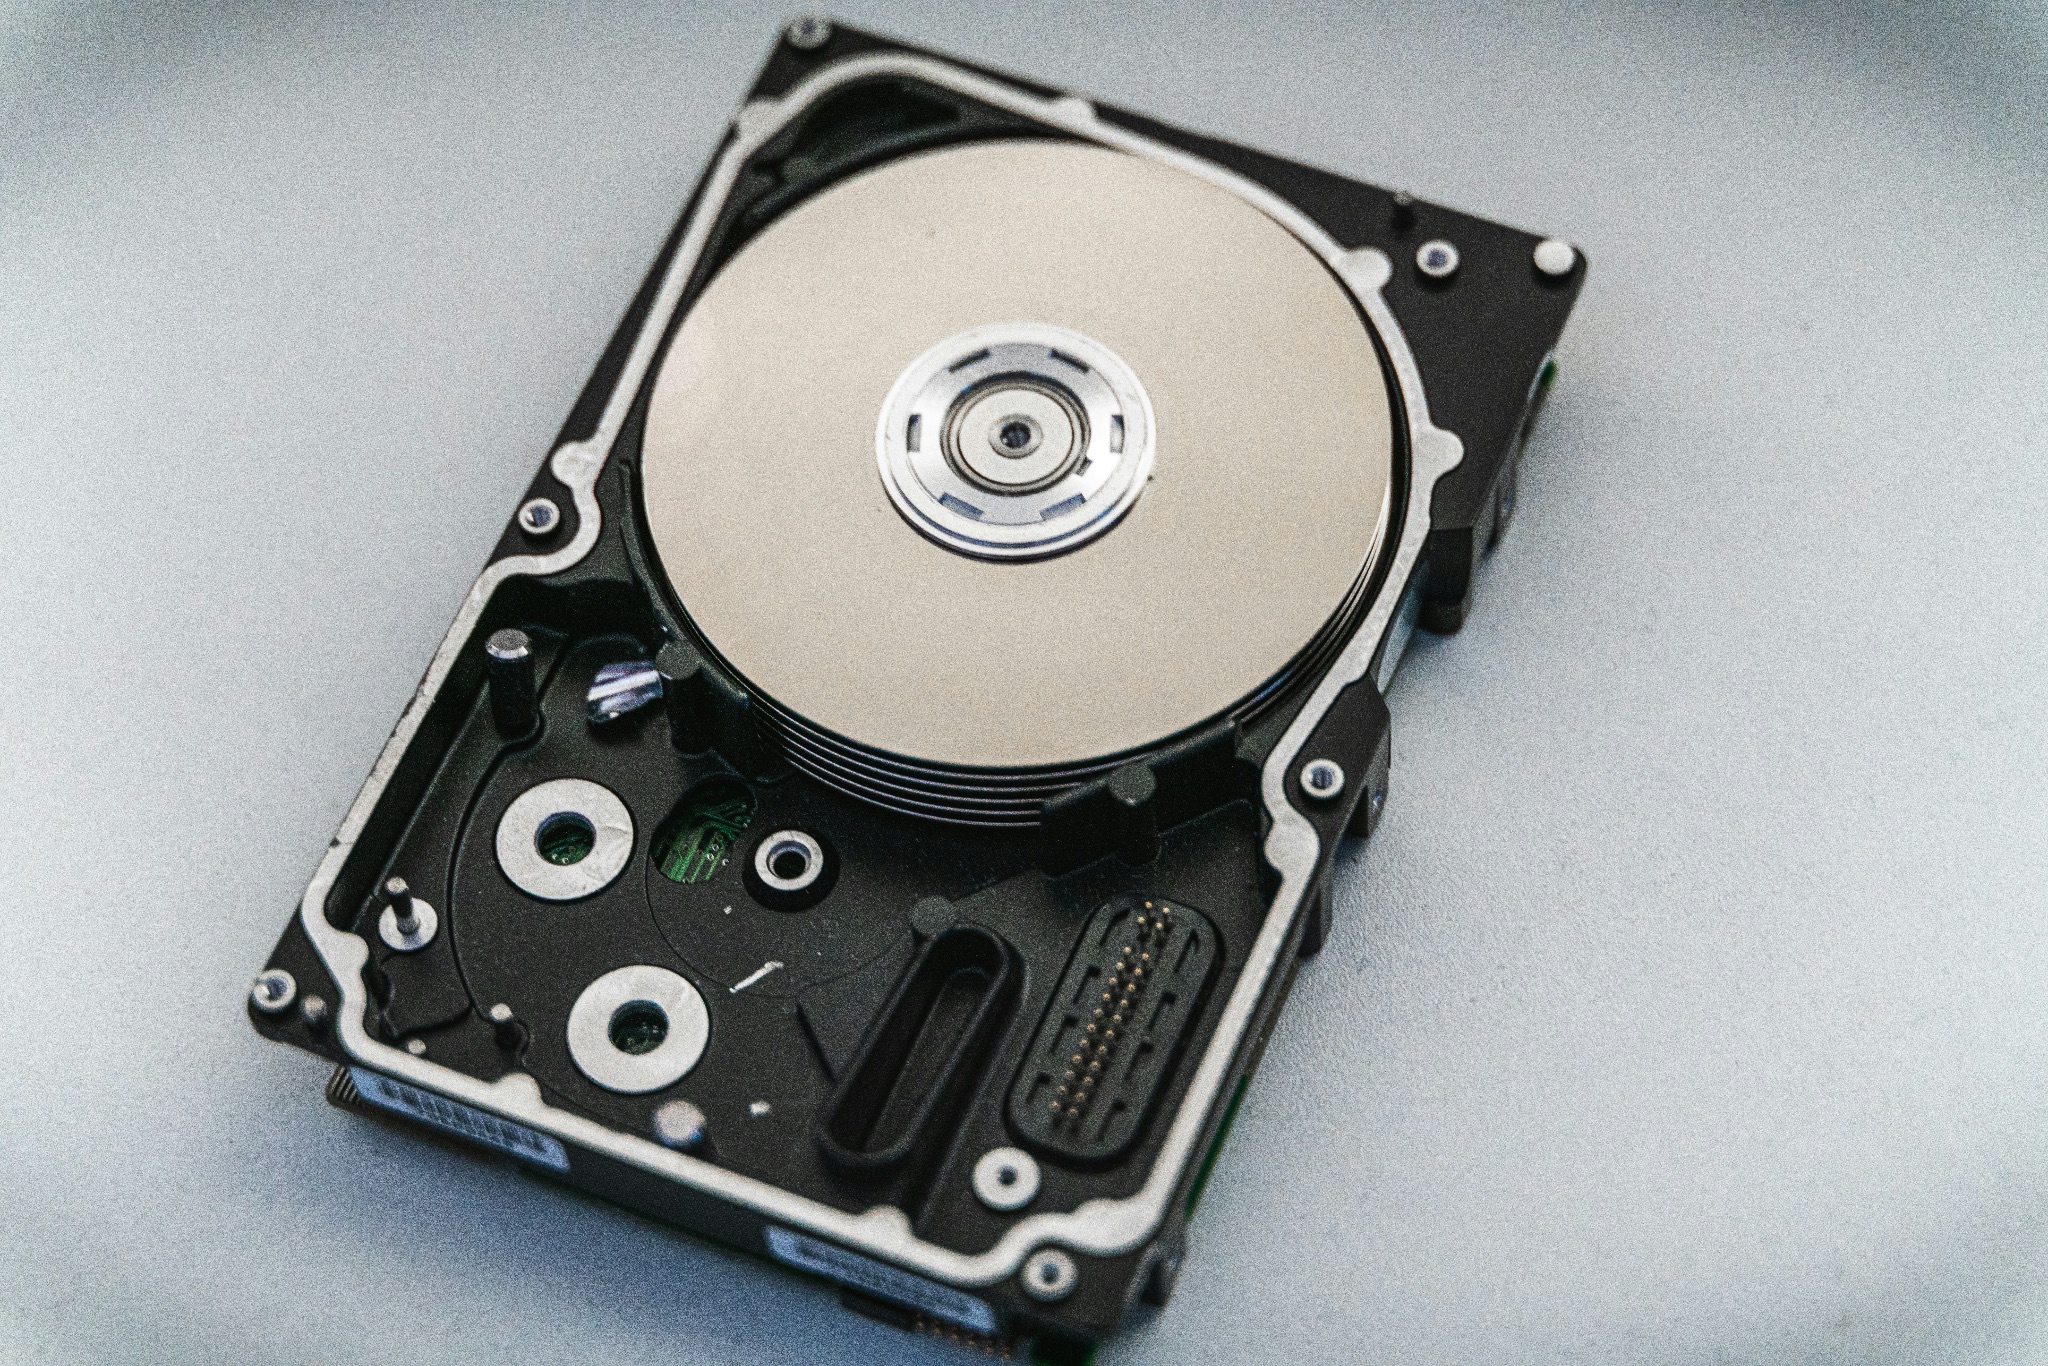 Platters of a hard drive 